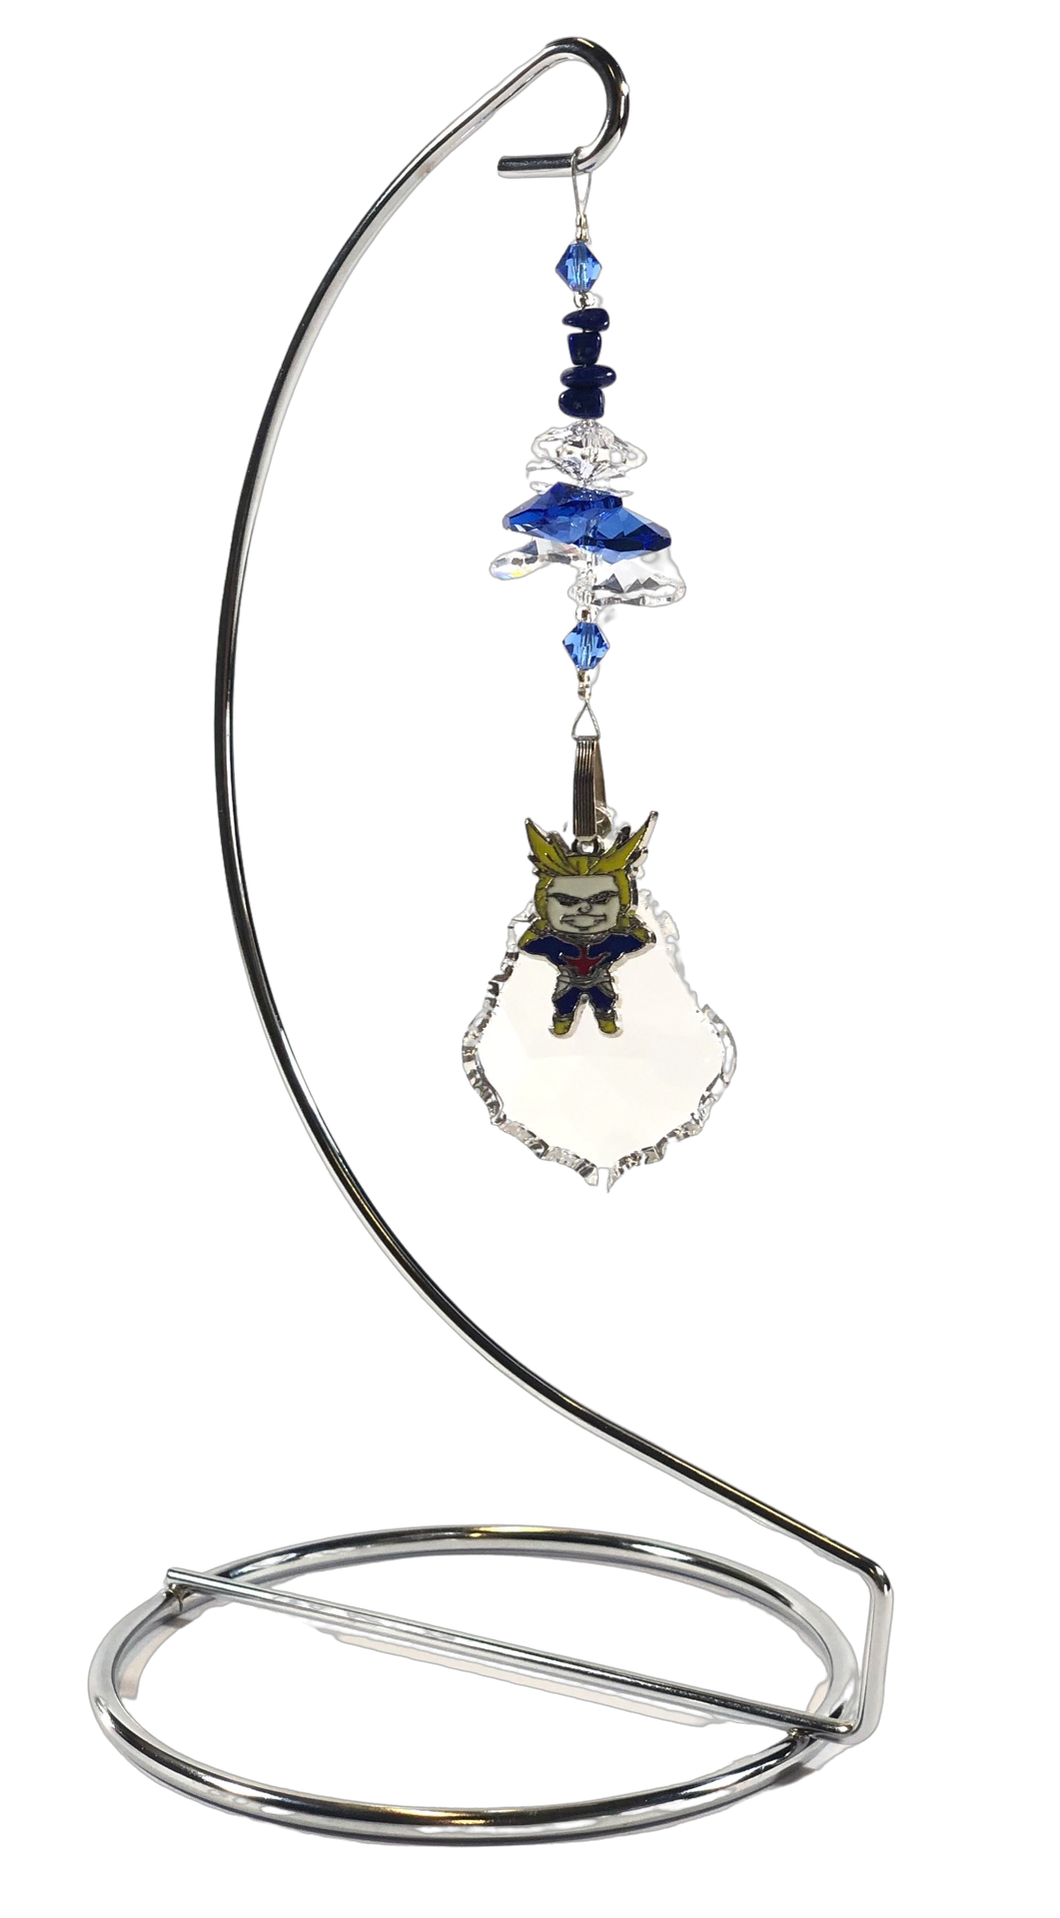 My Hero Anime - All Might crystal suncatcher is decorated with lapis lazuli gemstones and come on this amazing stand.